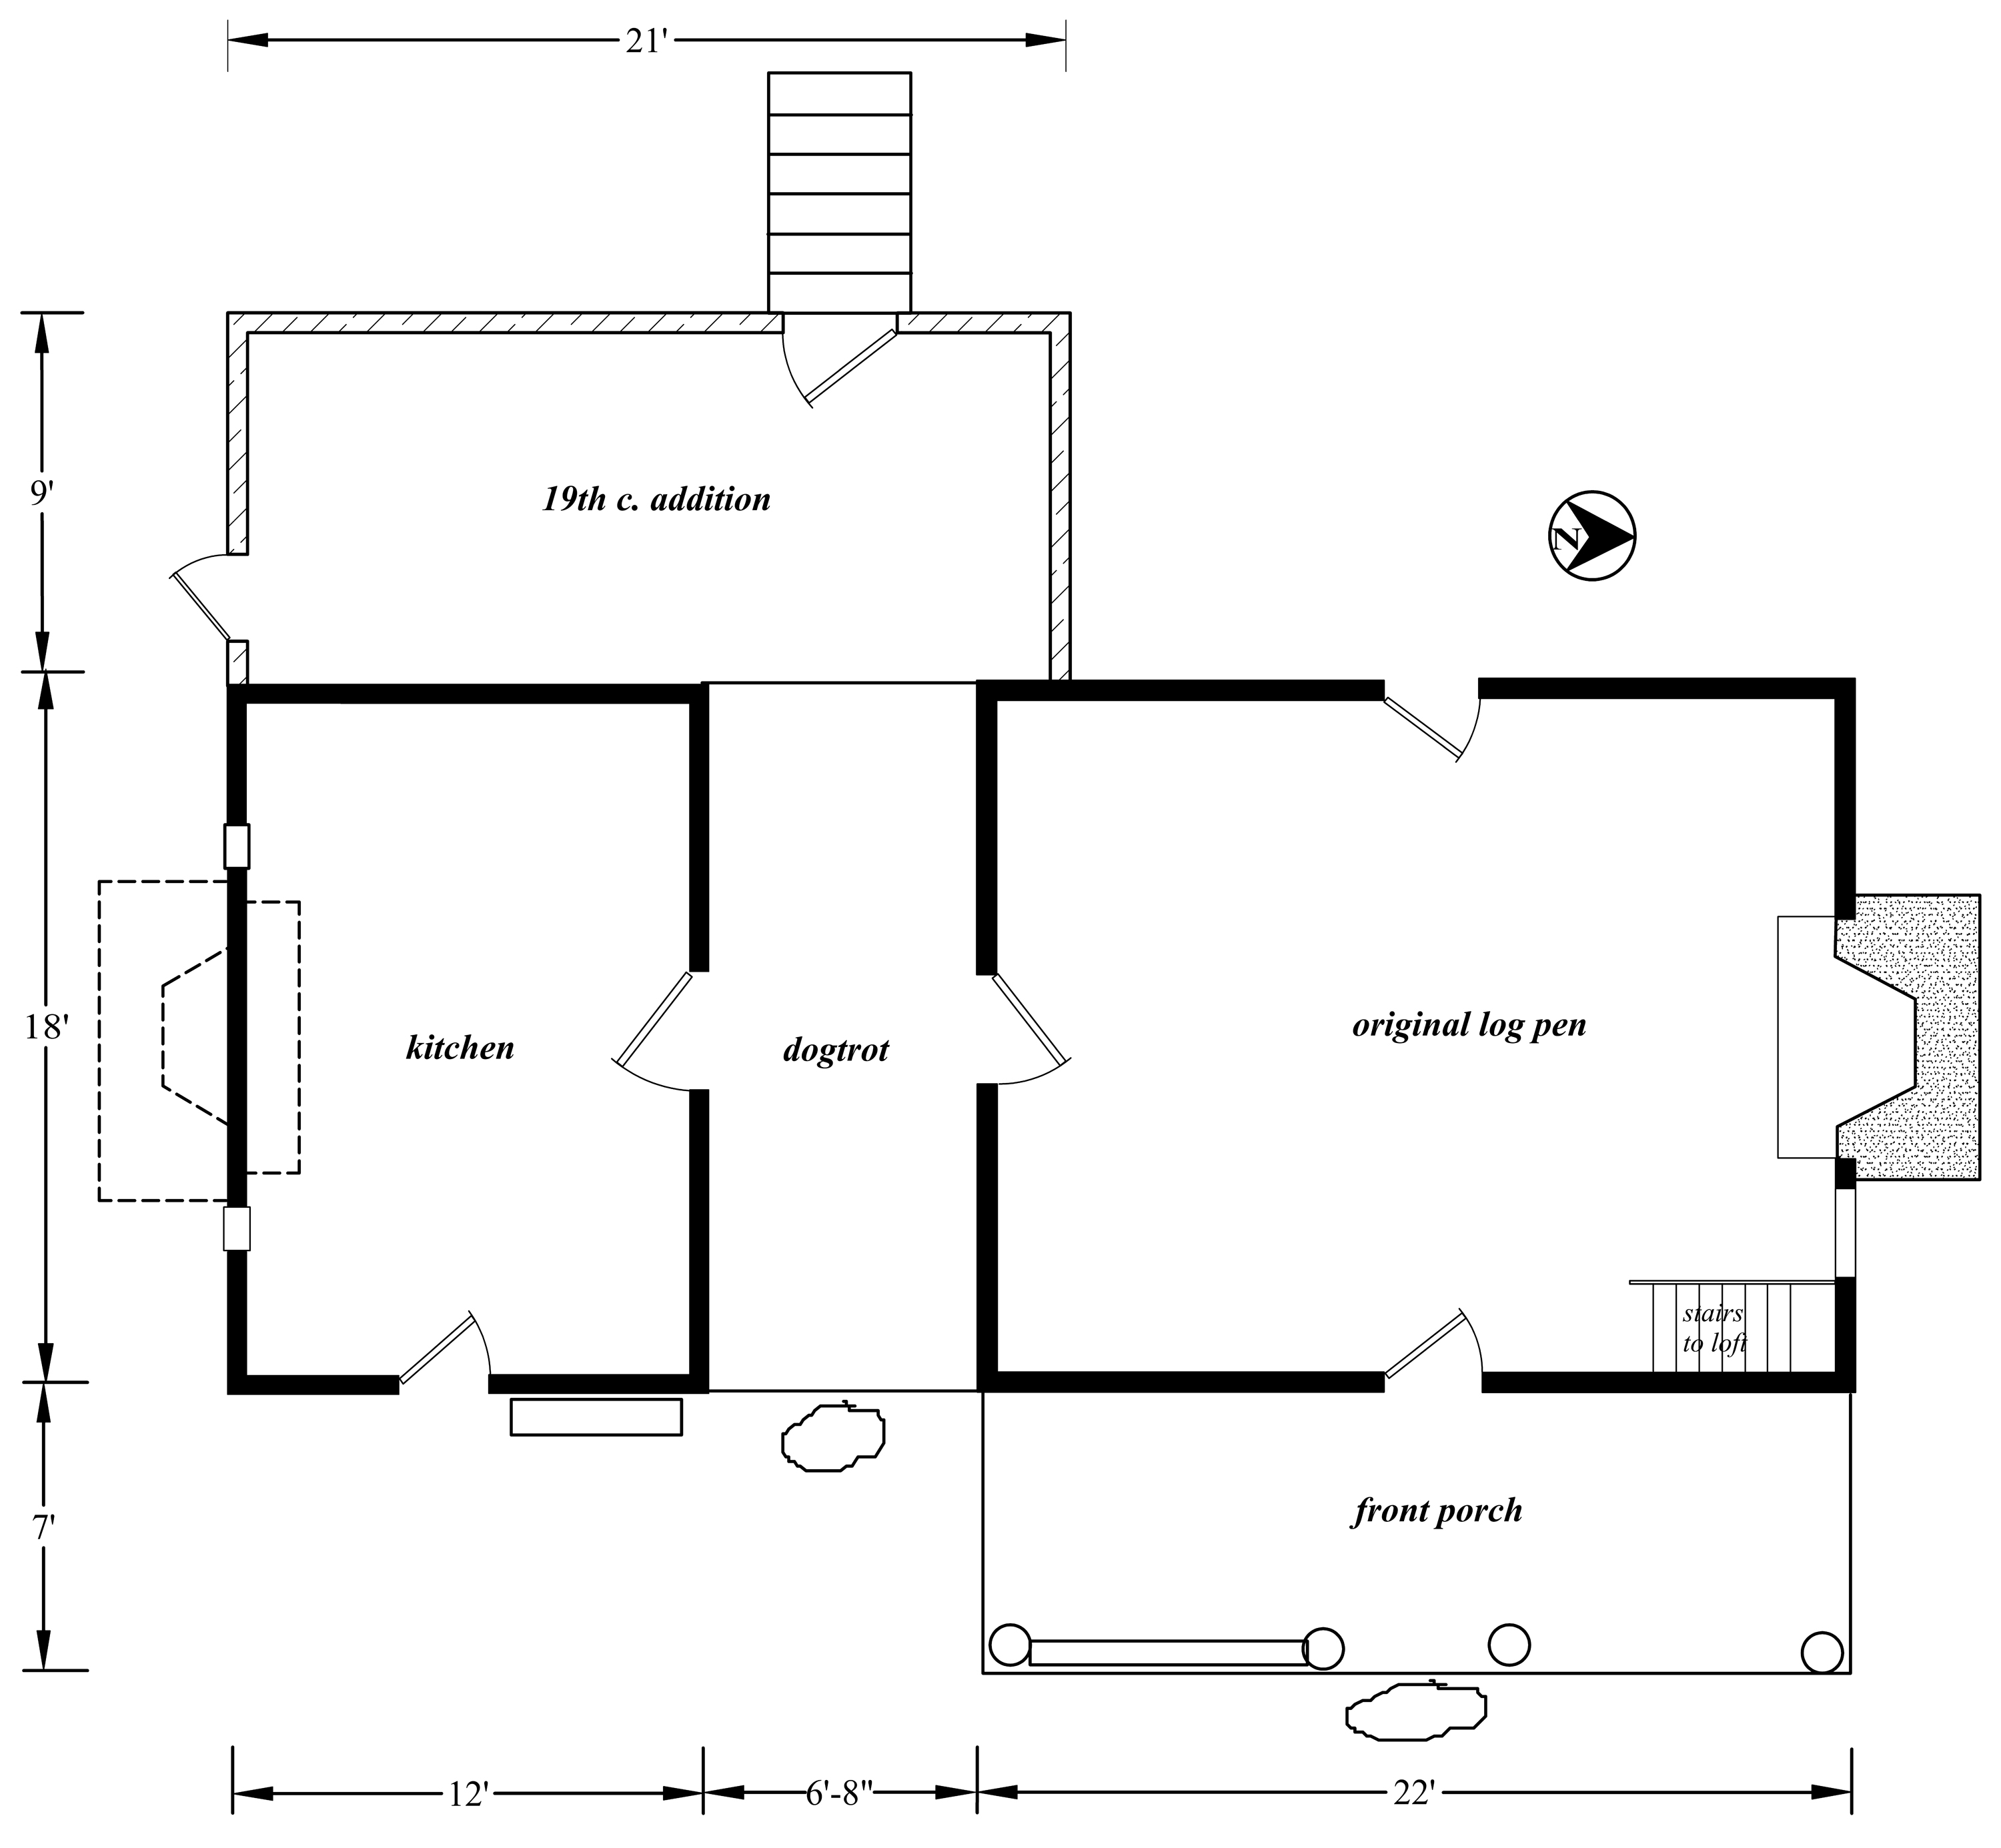 : House Floor Plan With Measurements , Floor Plans With Dimensions 